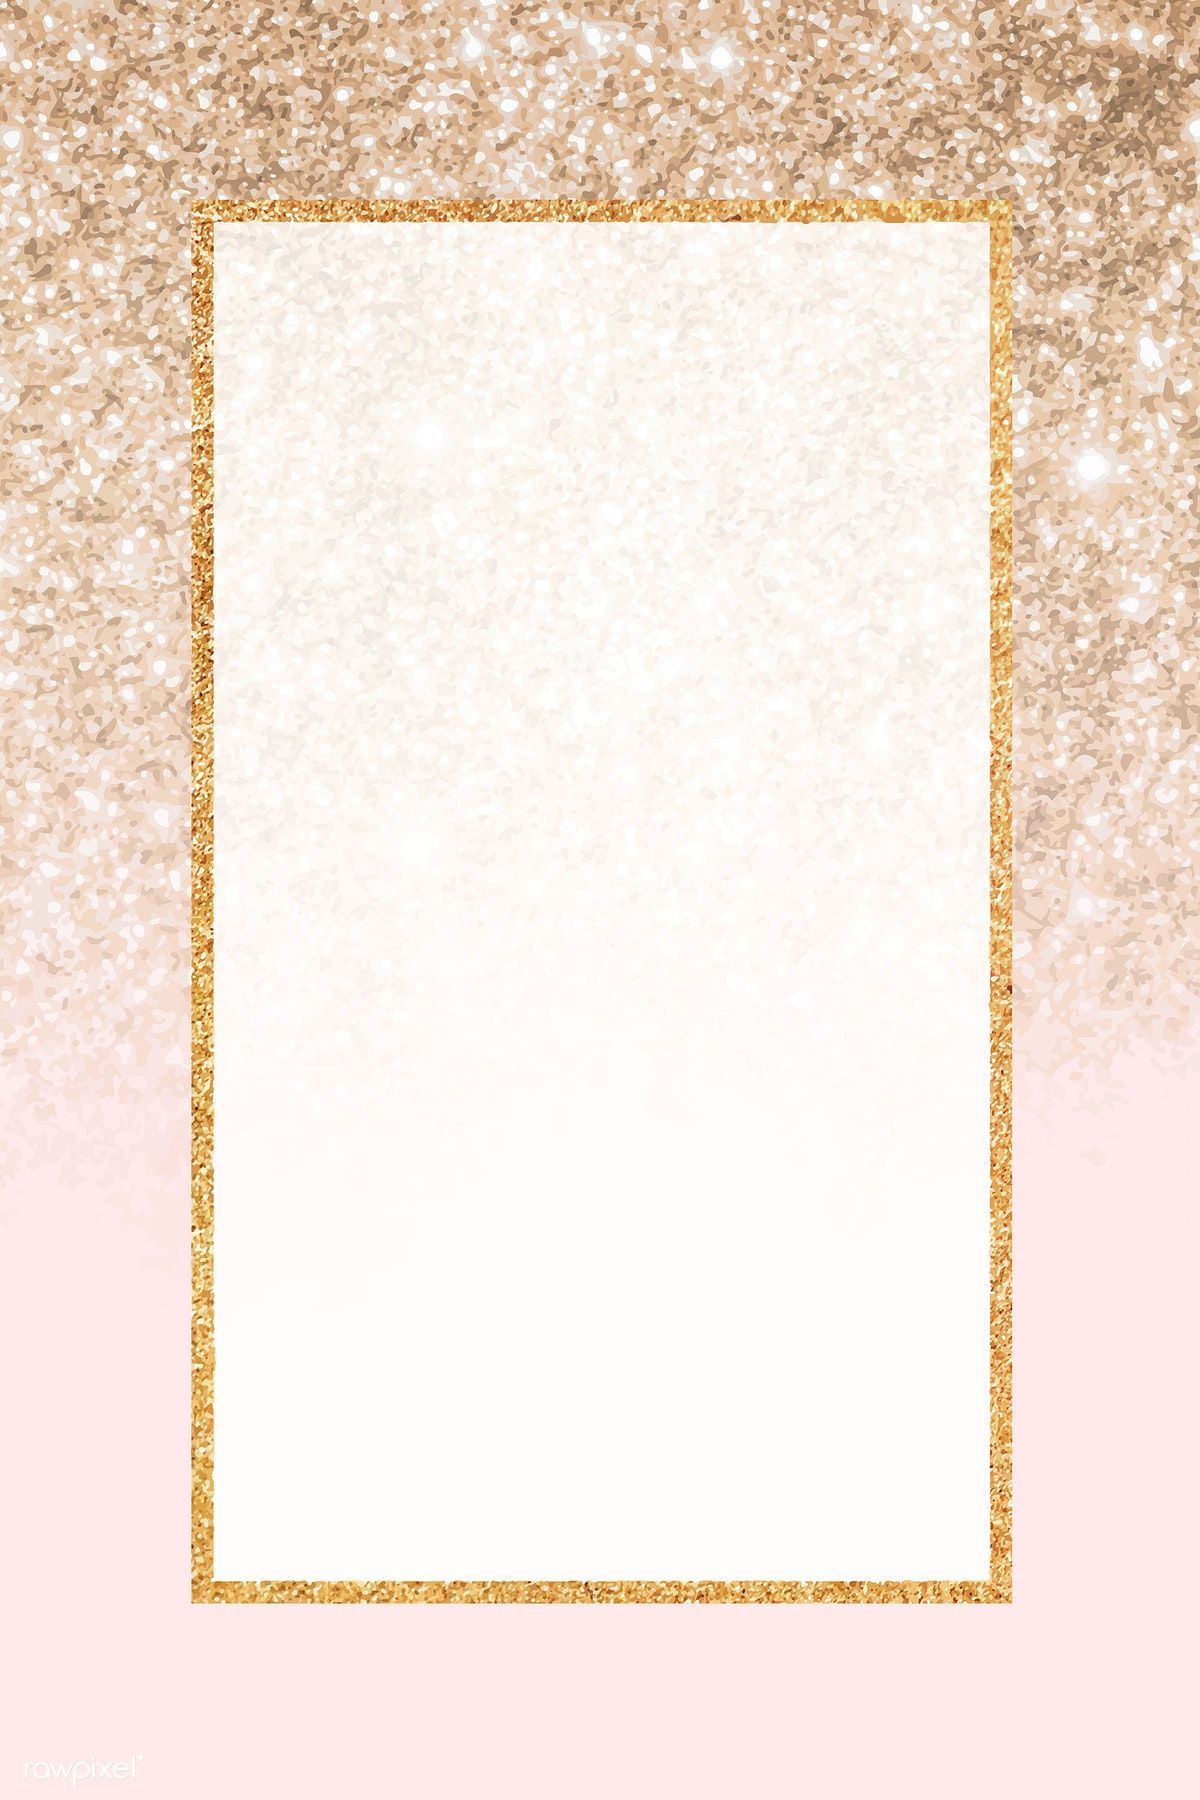 Download premium vector of Gold glittery rectangle frame vector 1016628. Pink glitter background, Gold glittery, Vector free